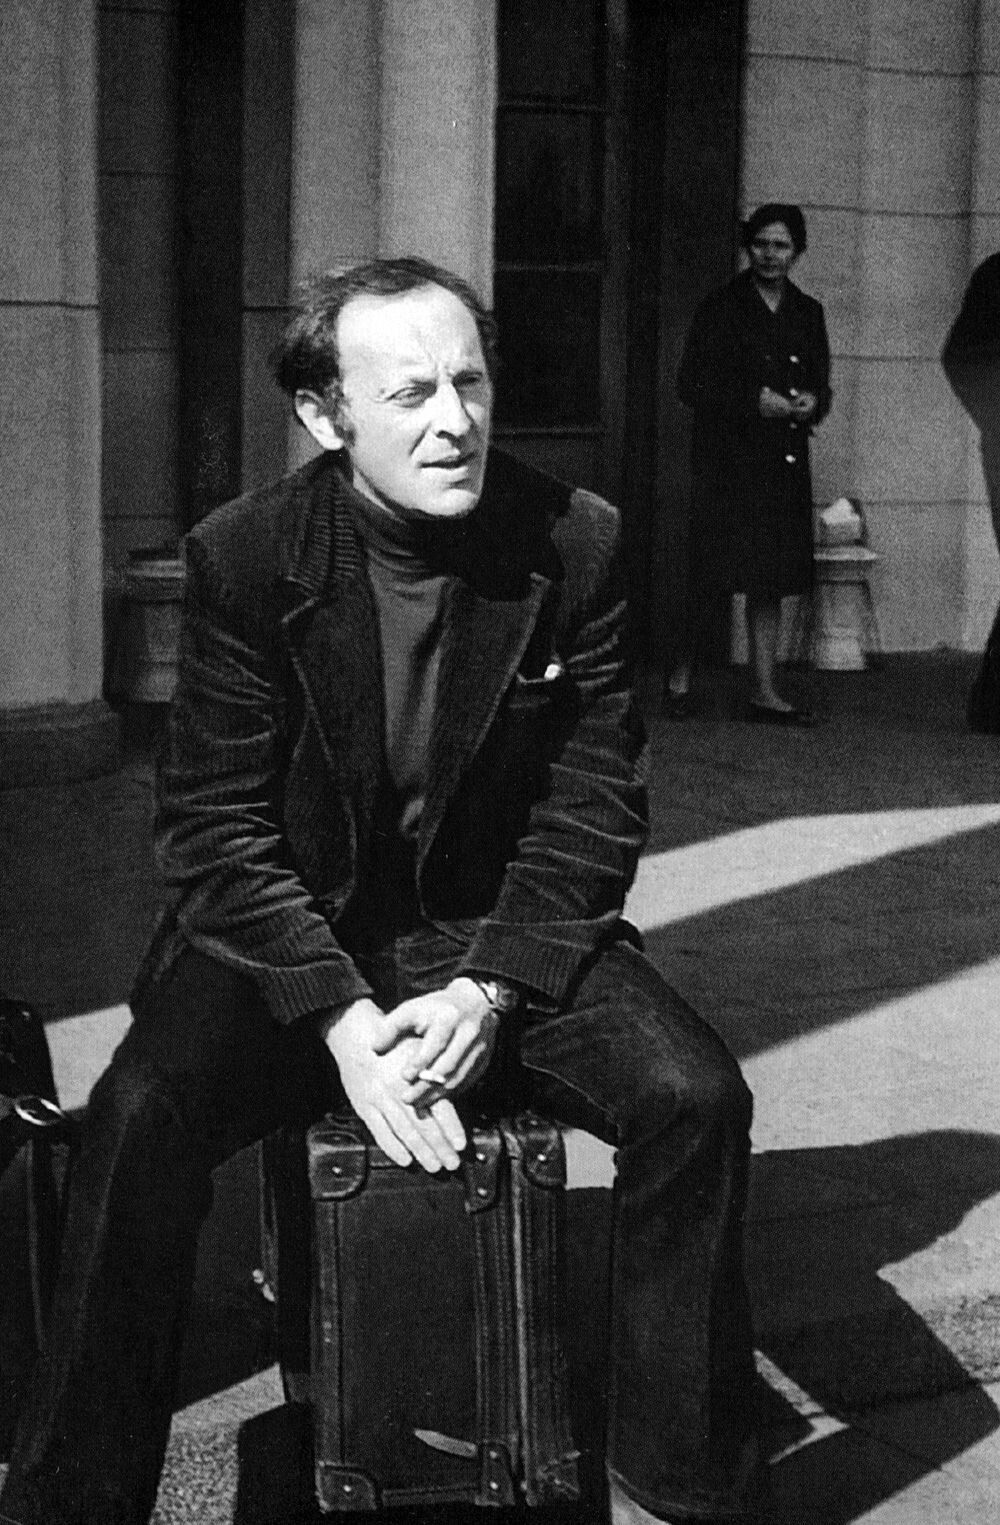 Pulkovo airport. Brodsky before his departure, 1972.